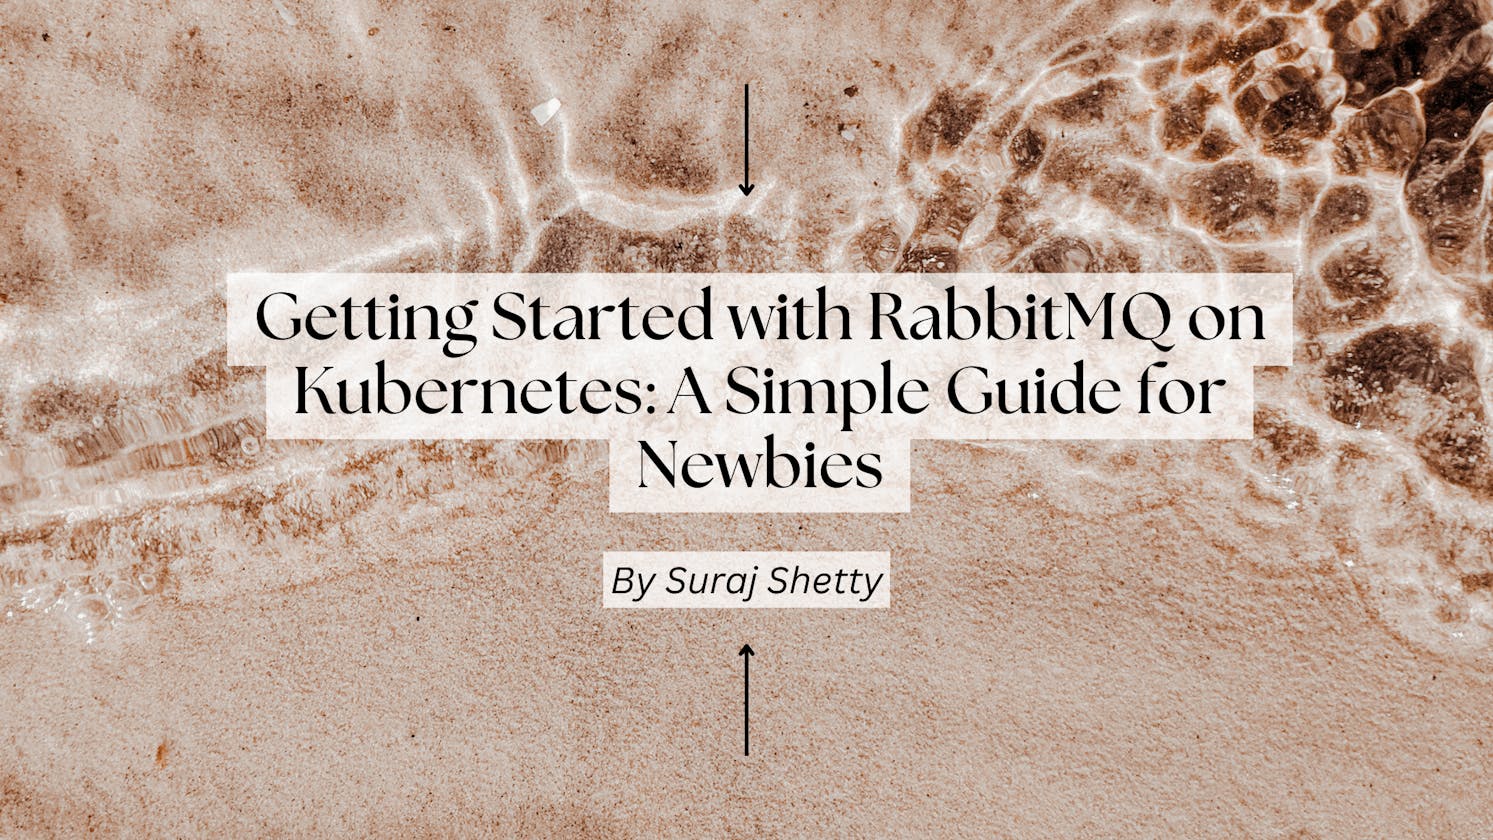 Getting Started with RabbitMQ on Kubernetes: A Simple Guide for Newbies